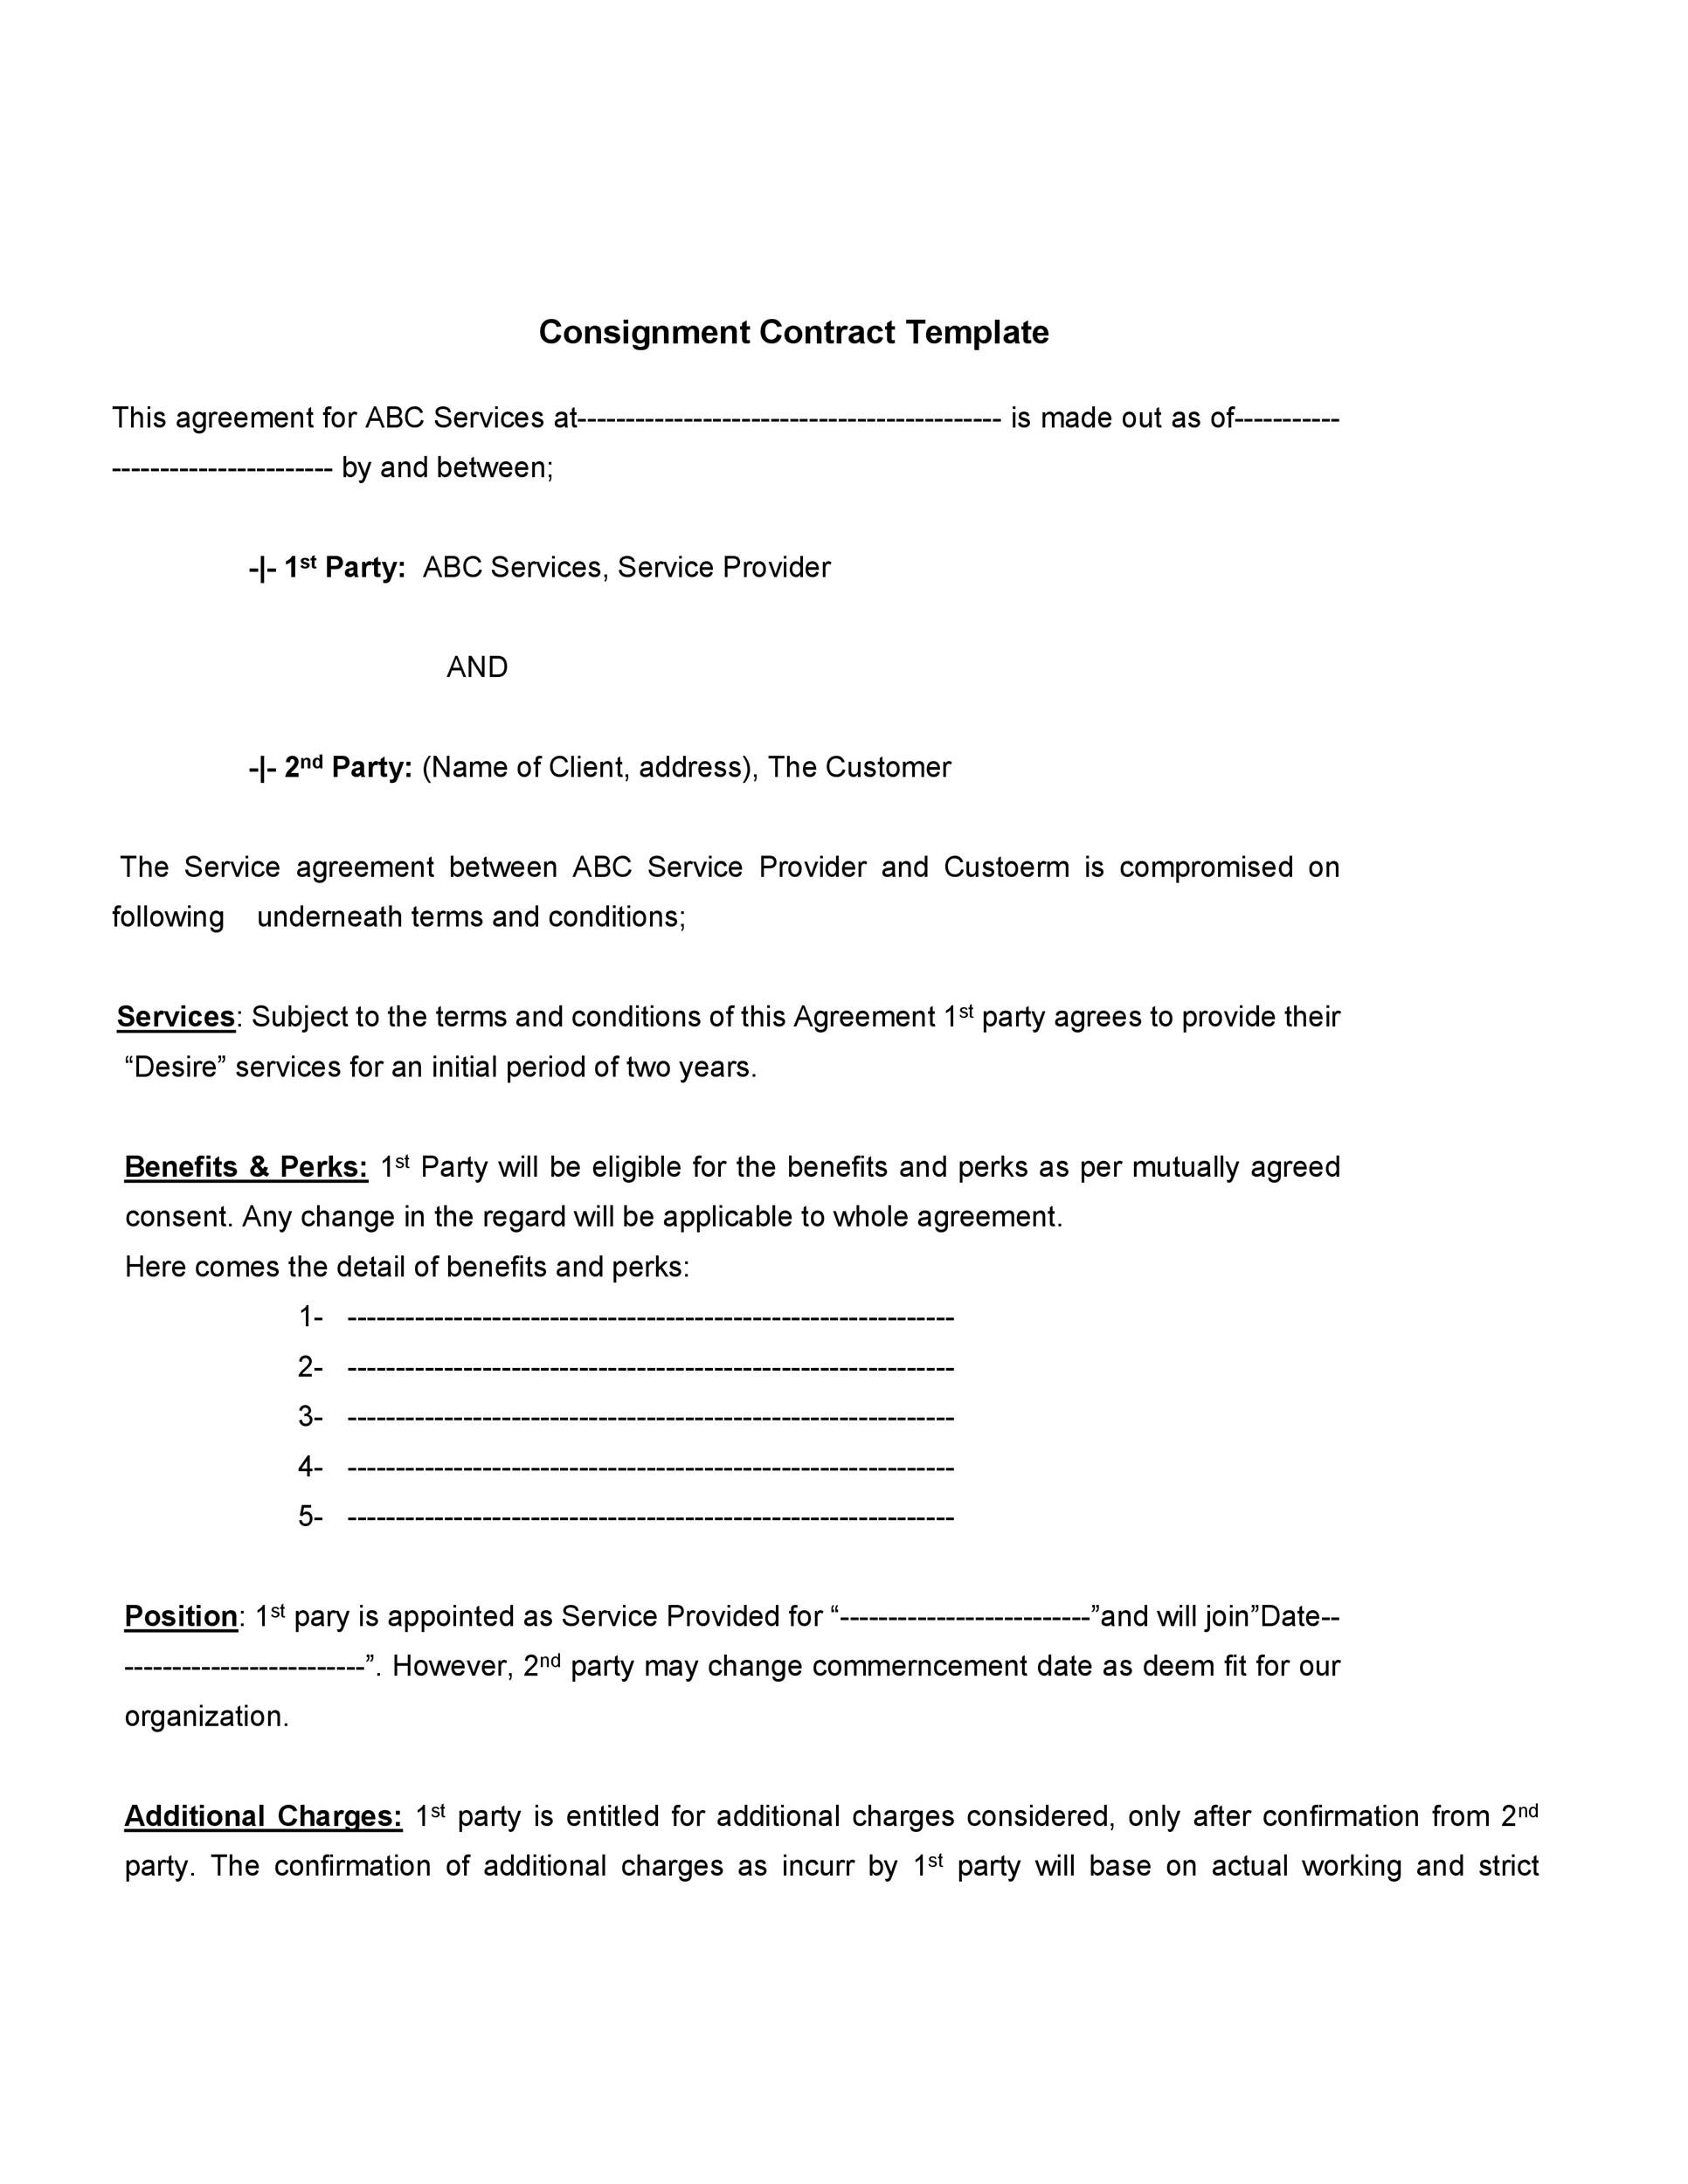 40-best-consignment-agreement-templates-forms-templatelab-ncgo